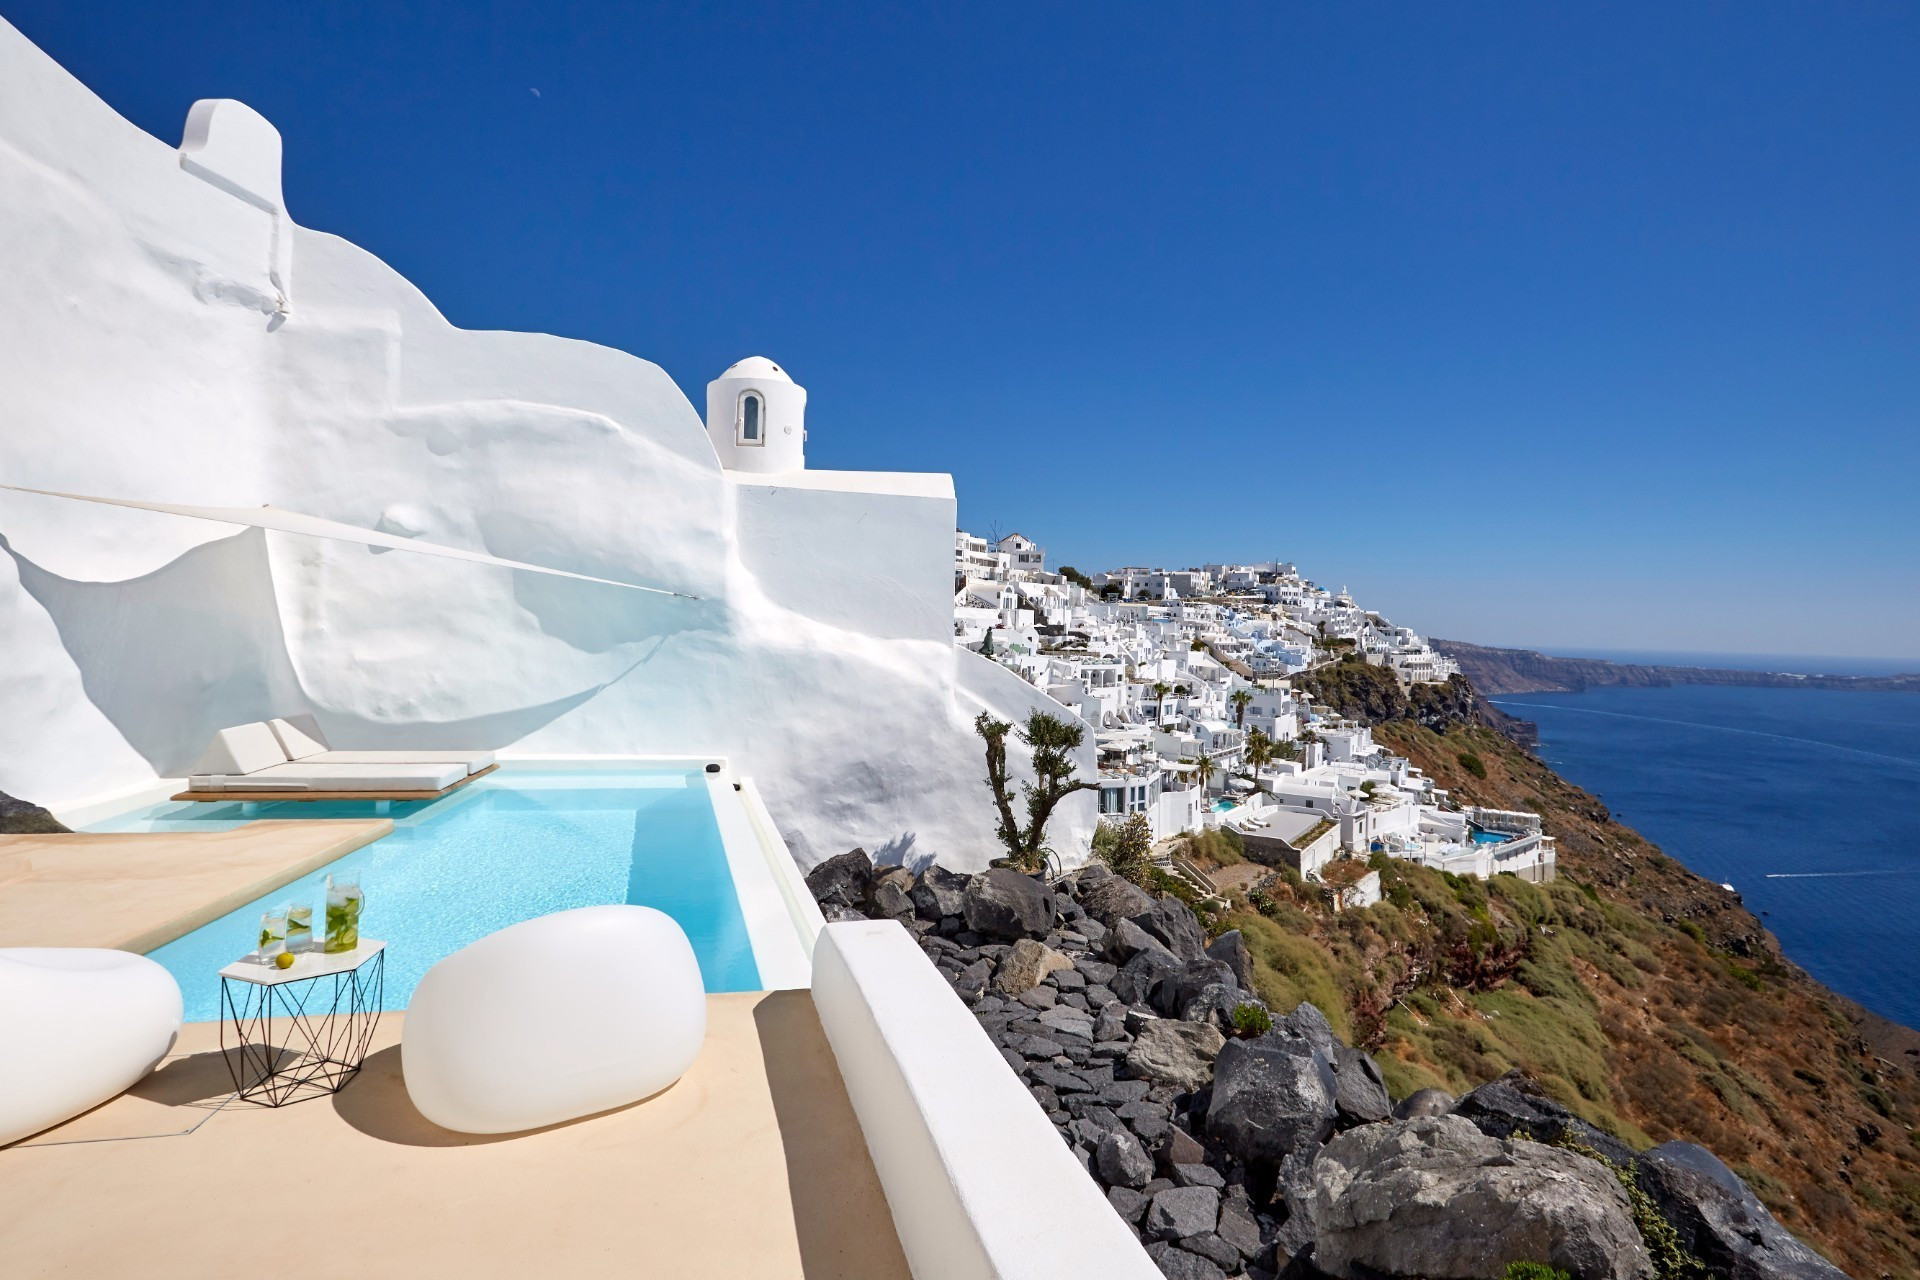 Luxury honeymoons in Santorini: What to do and where to stay